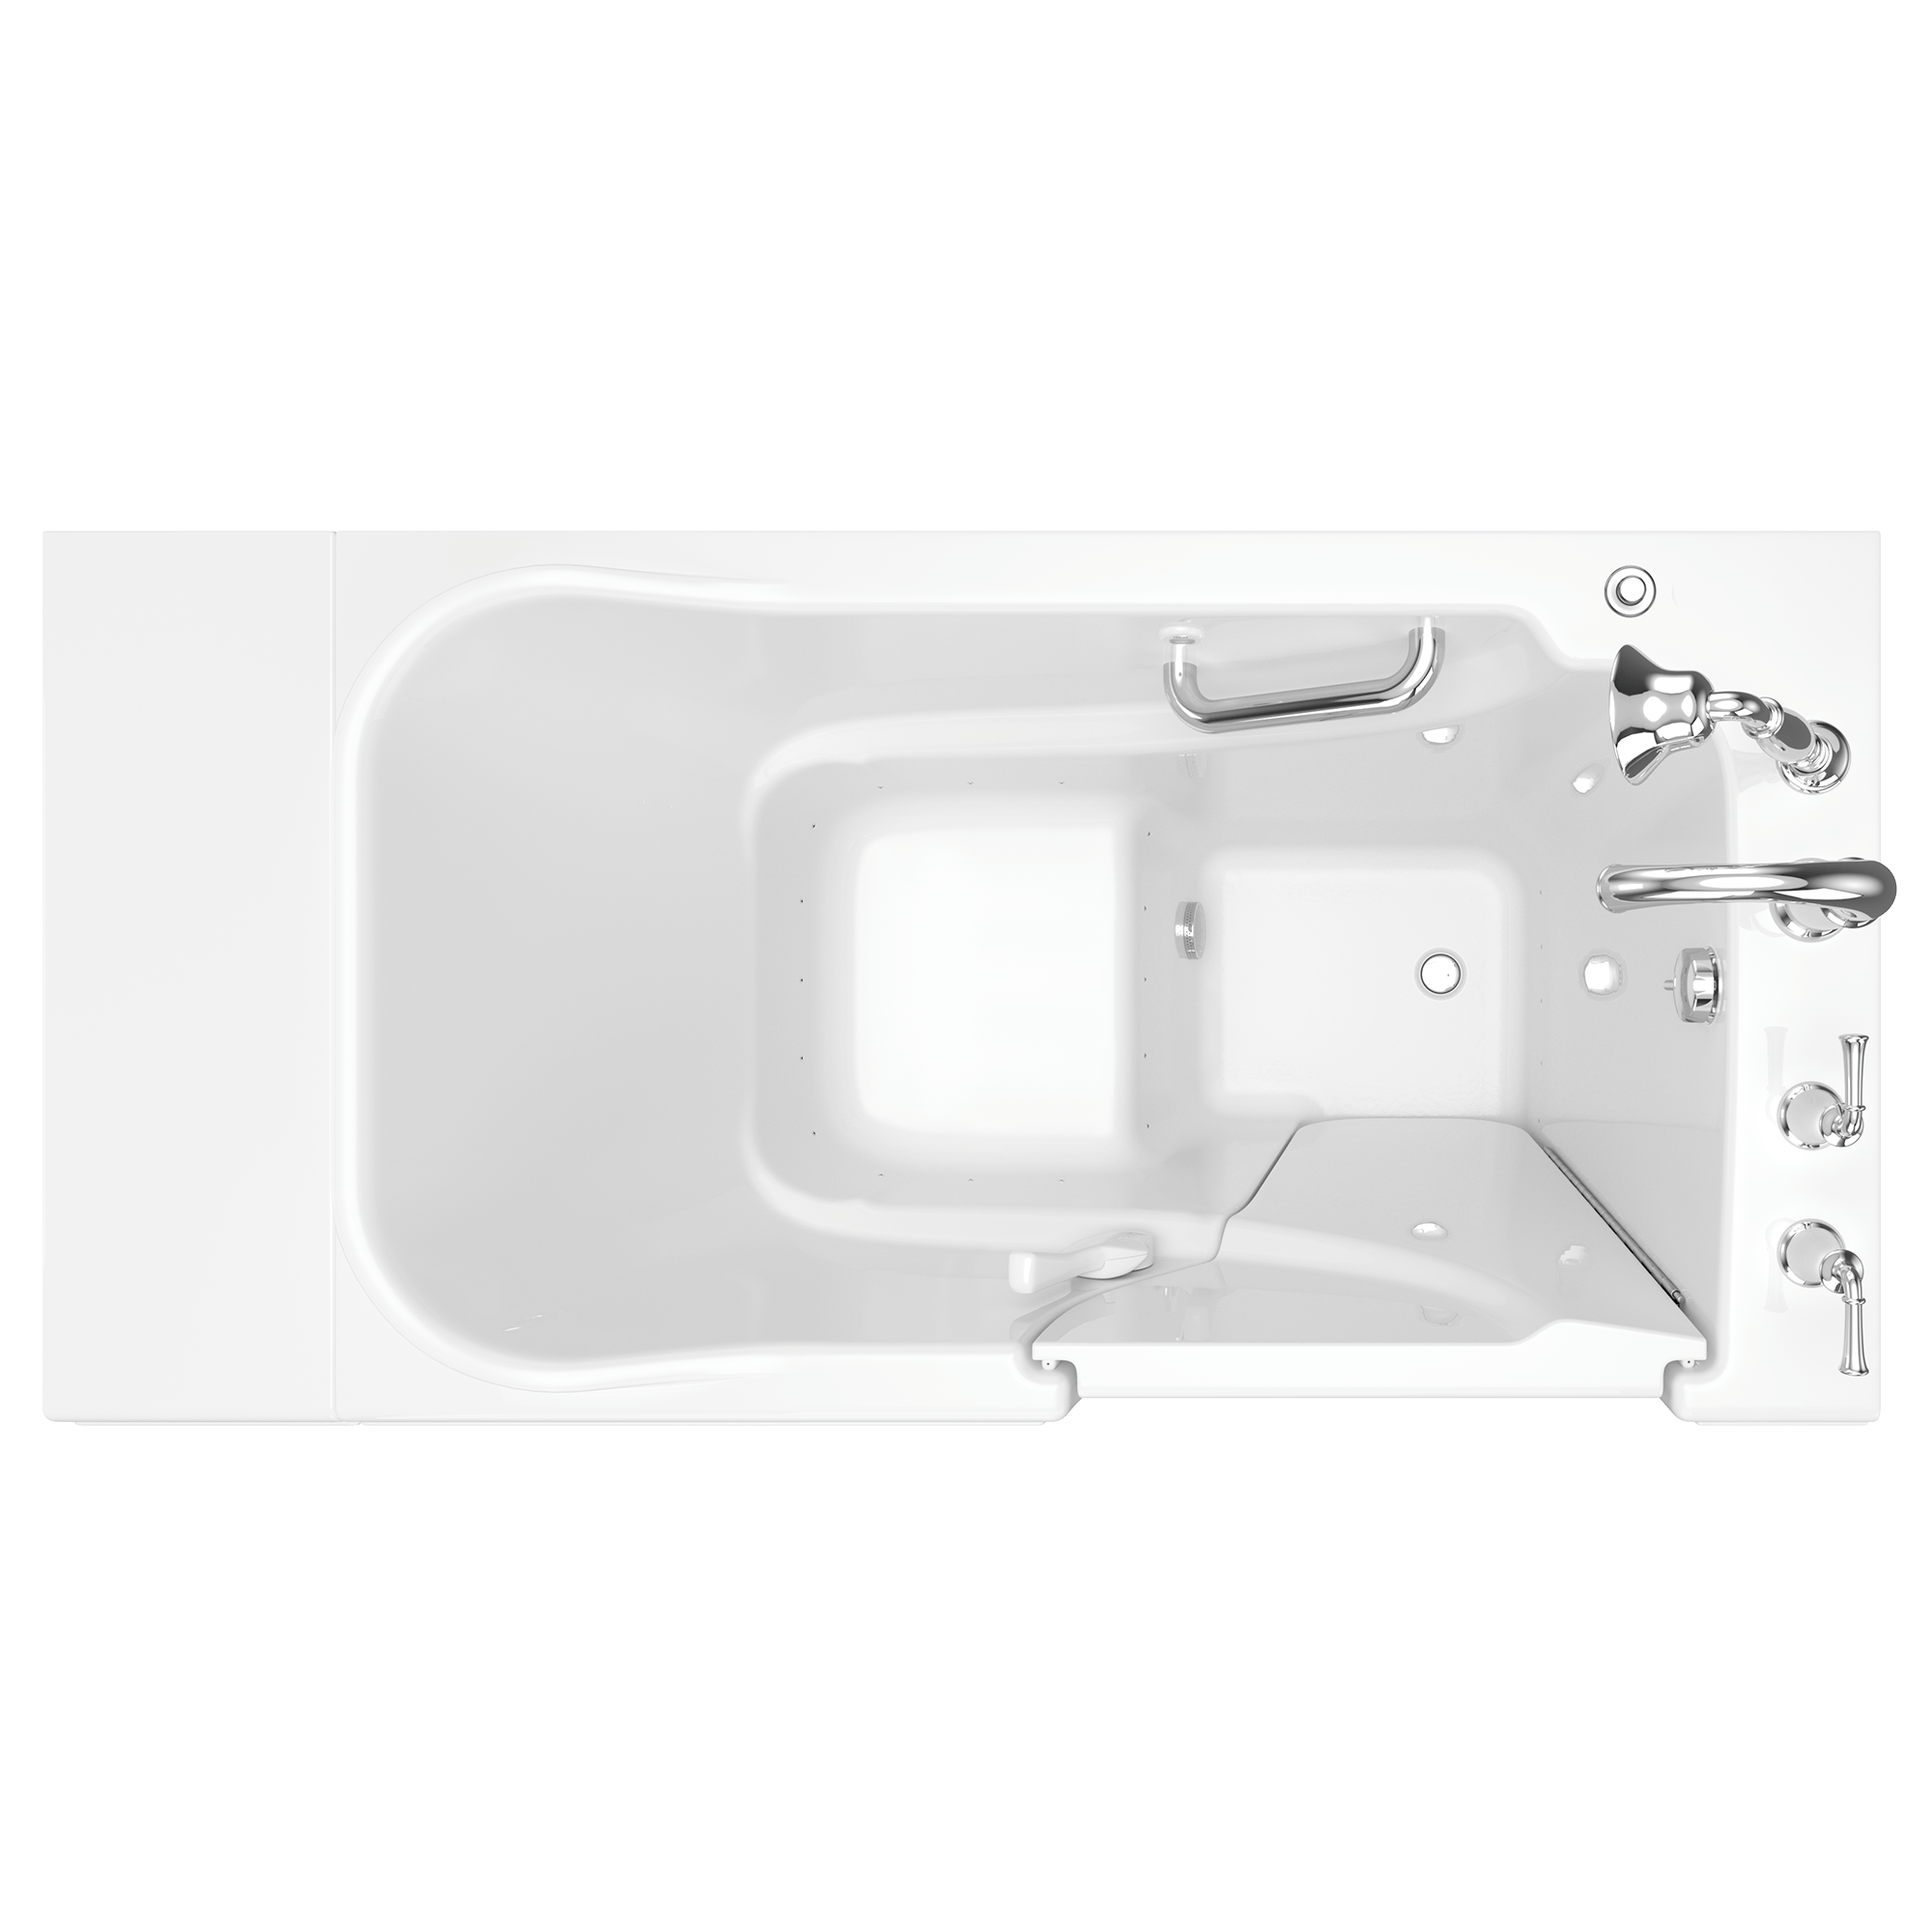 Gelcoat Value Series 30x52 Inch Walk-In Bathtub with Air Spa System - Right Hand Door and Drain